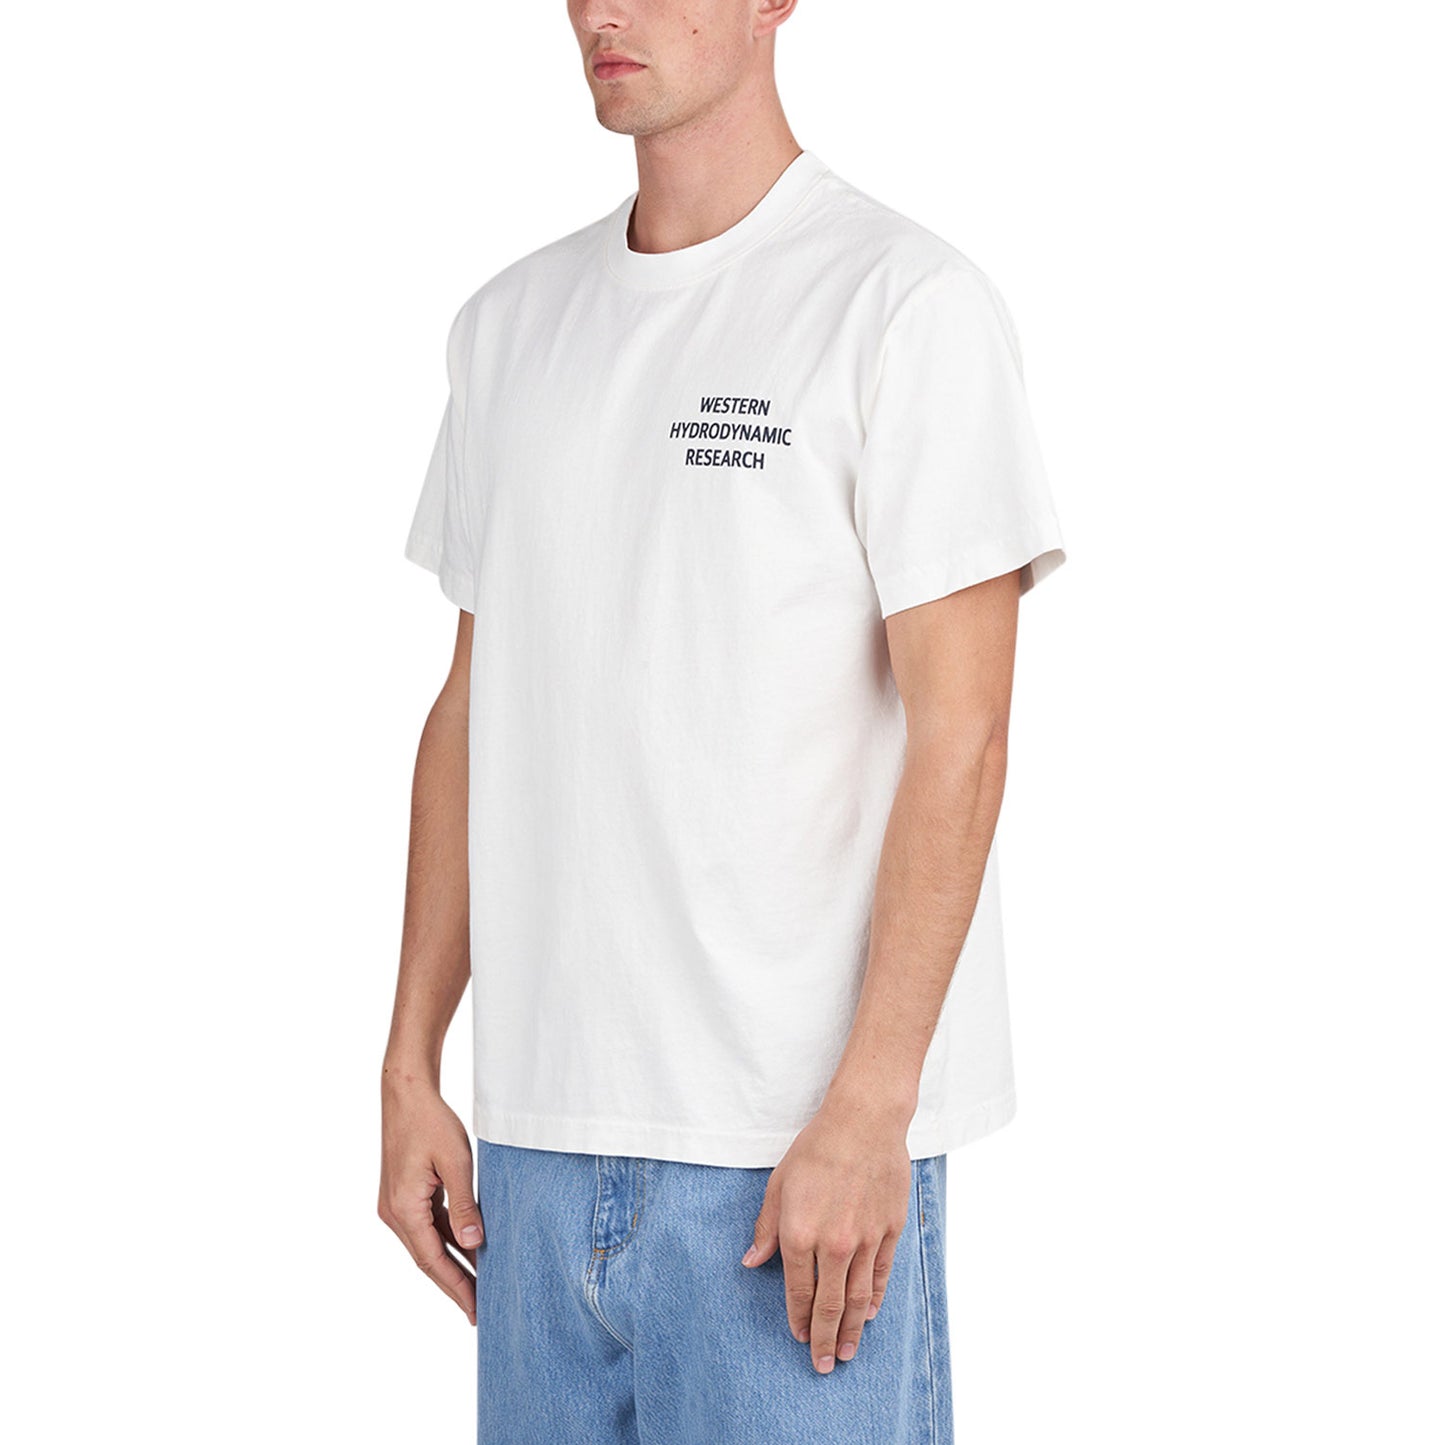 Western Hydrodynamic Research Worker S/S T-Shirt (White)